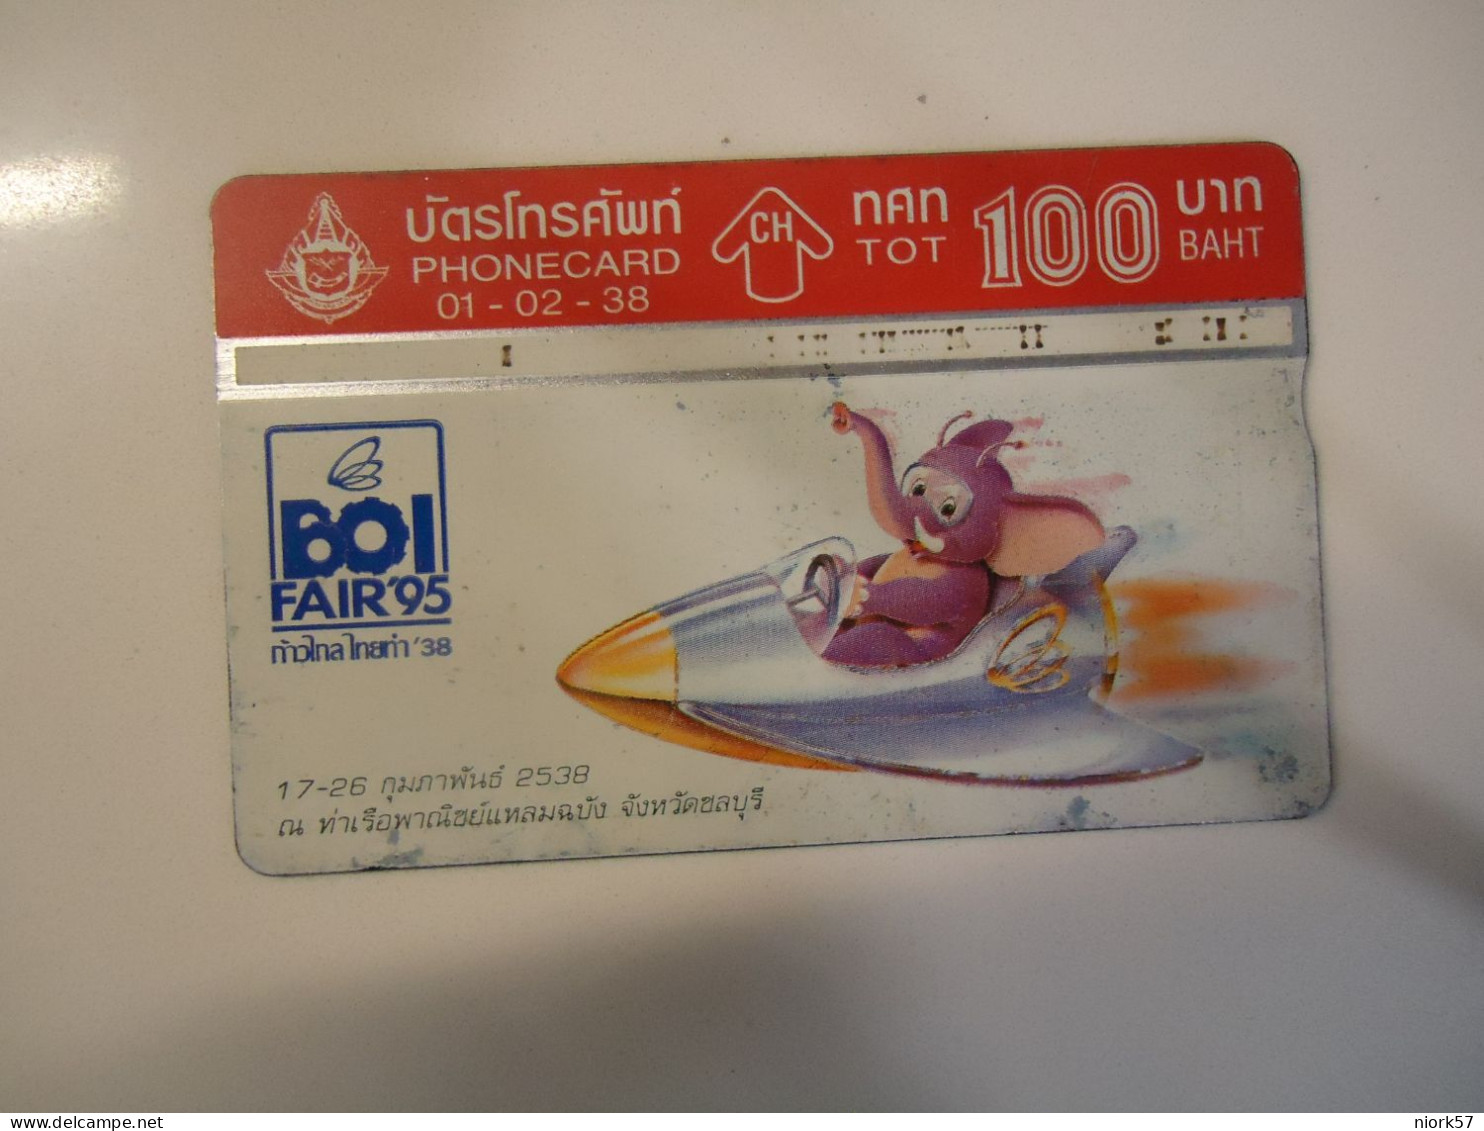 THAILAND USED CARDS OLD MAGNETIC BOI FAIR 95 MASCOTS - Sport